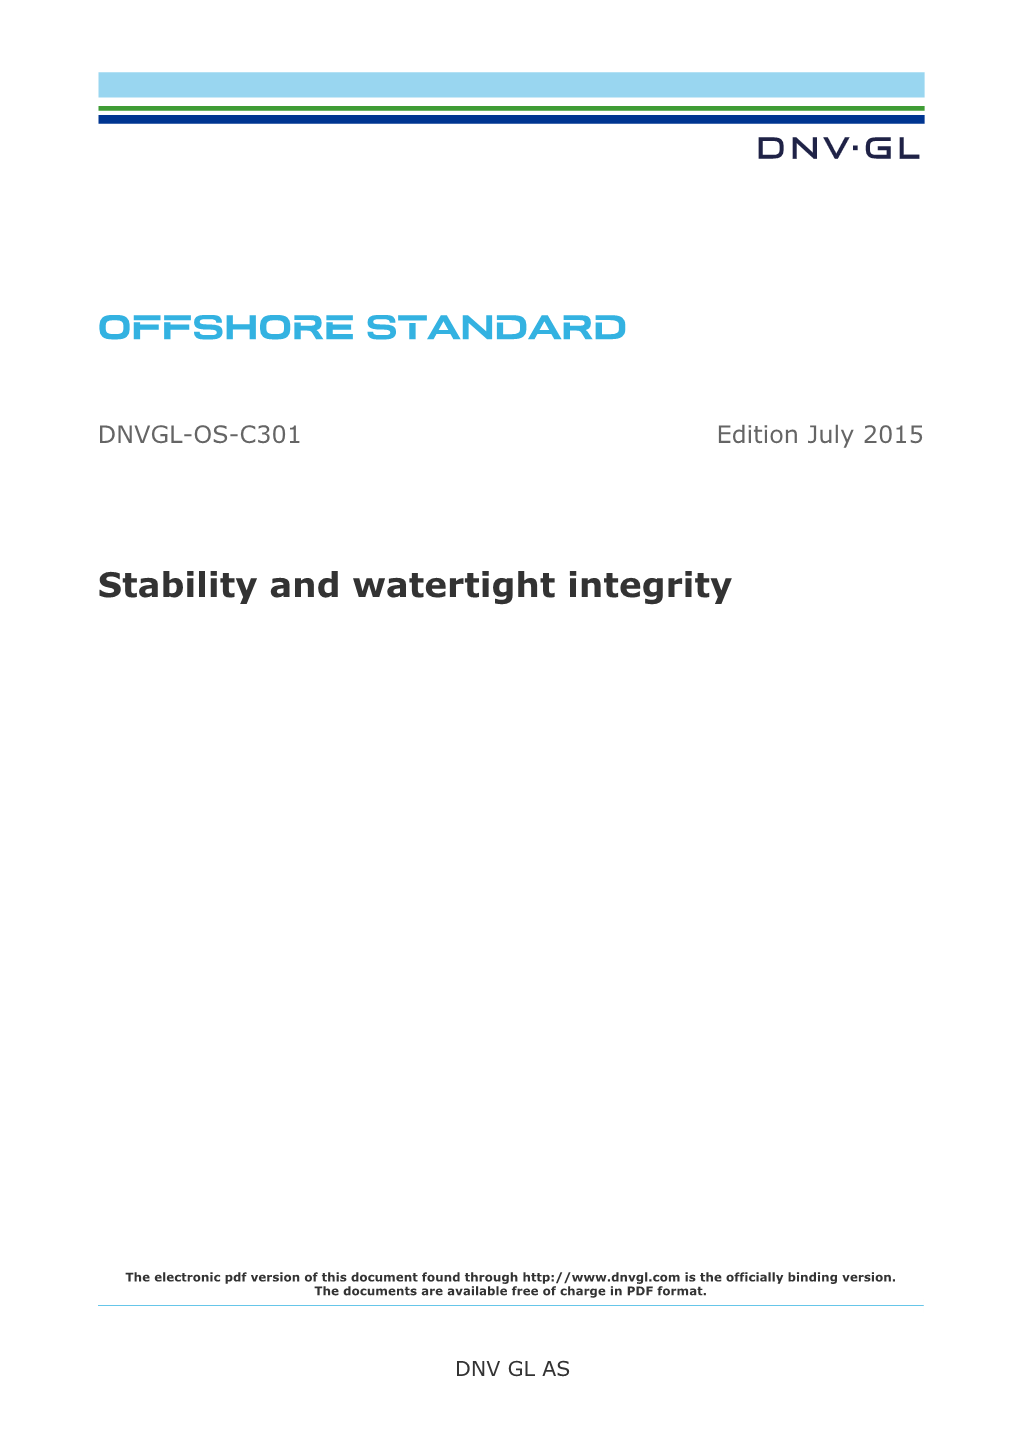 DNVGL-OS-C301: Stability and Watertight Integrity